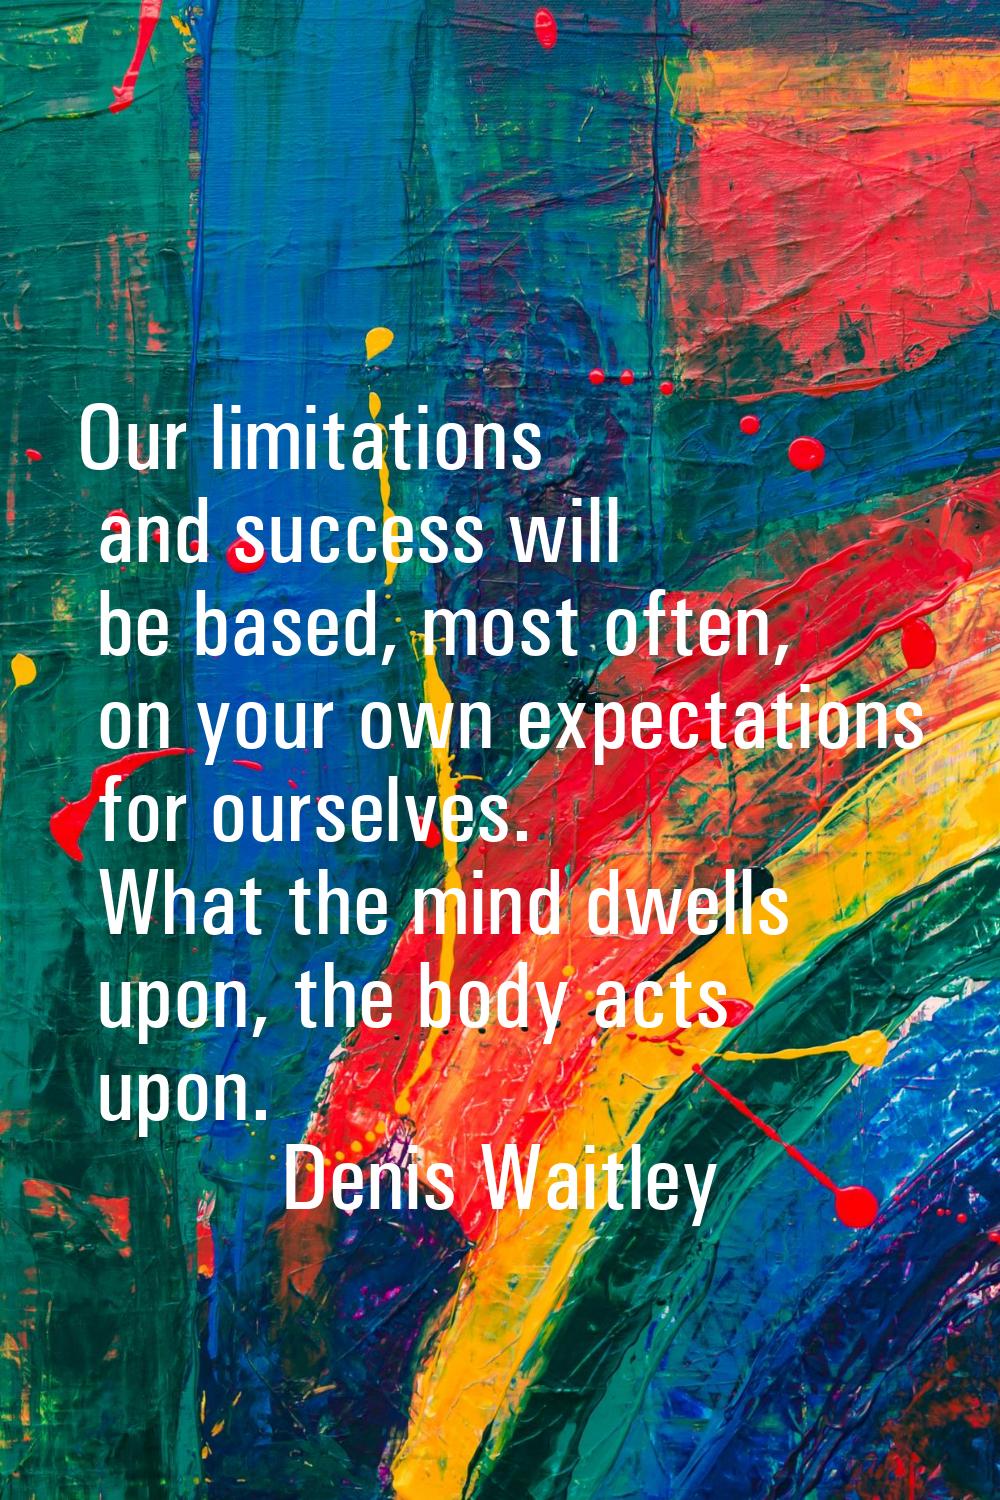 Our limitations and success will be based, most often, on your own expectations for ourselves. What